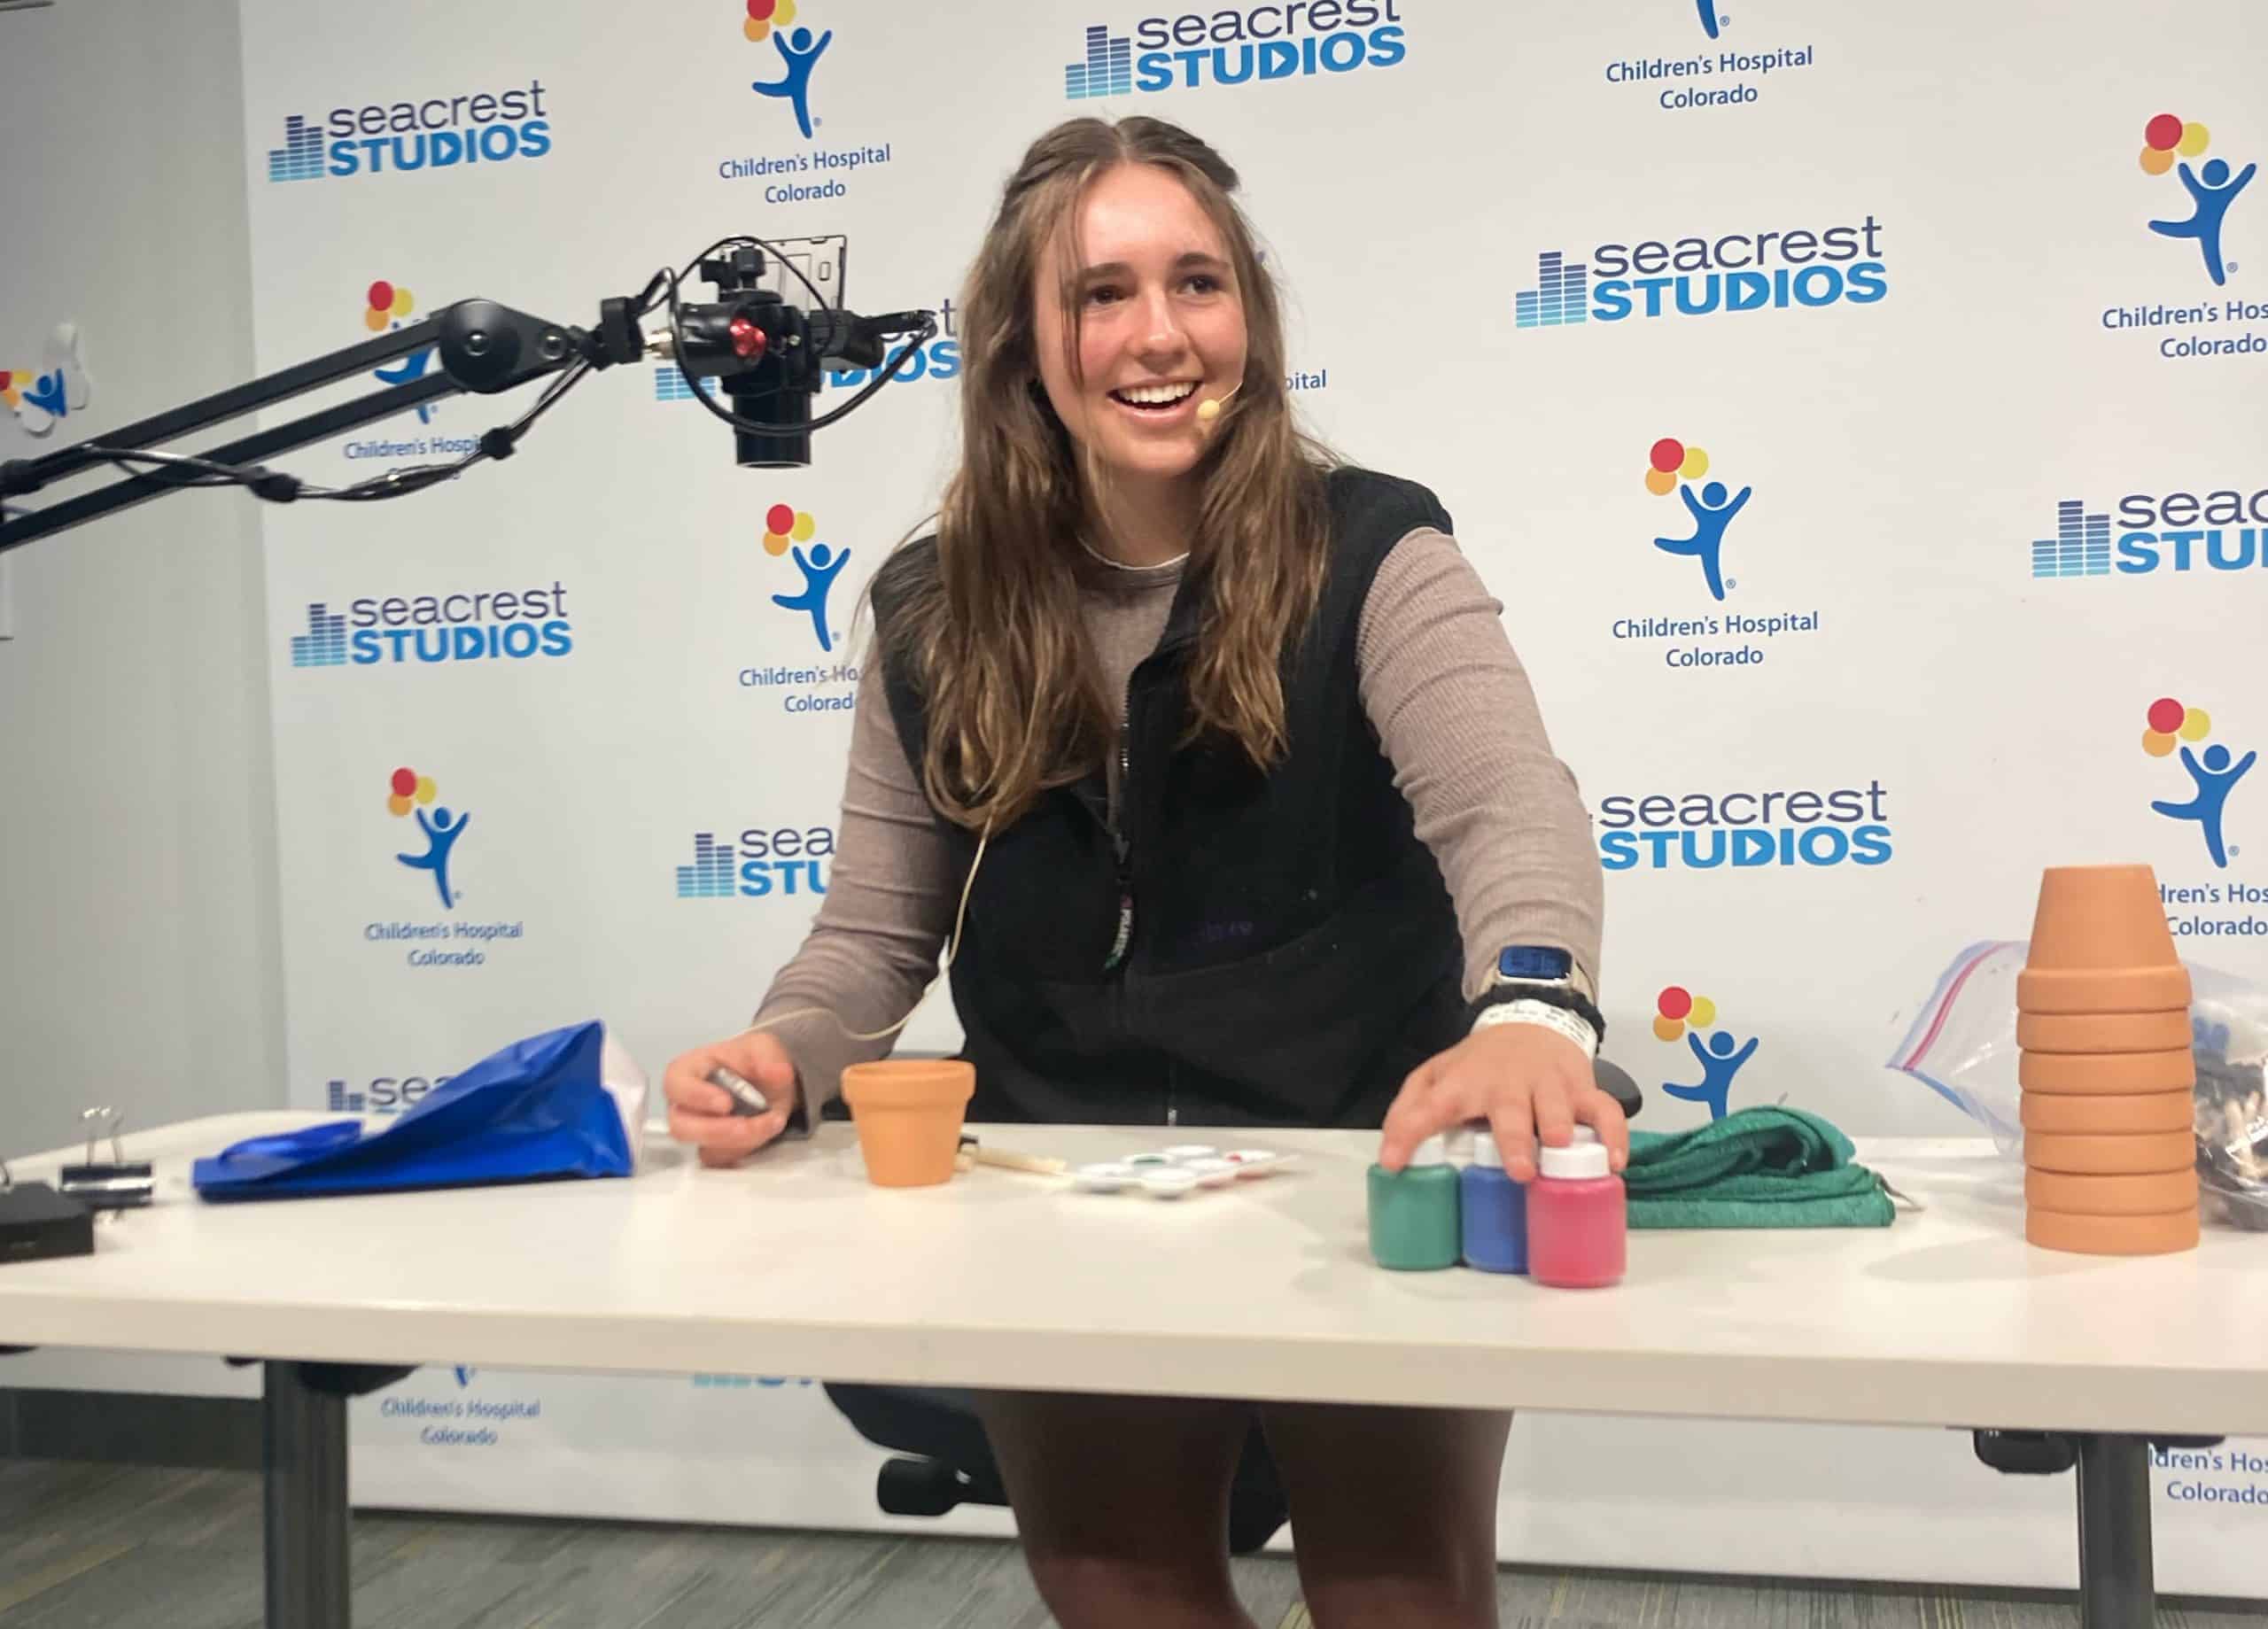 High school senior Elizabeth Marr is sitting at a desk in a studio at Children's Hospital. She is looking at the camera and has craft supplies on the table in front of her. There is a mic on a long stand in next to her face.